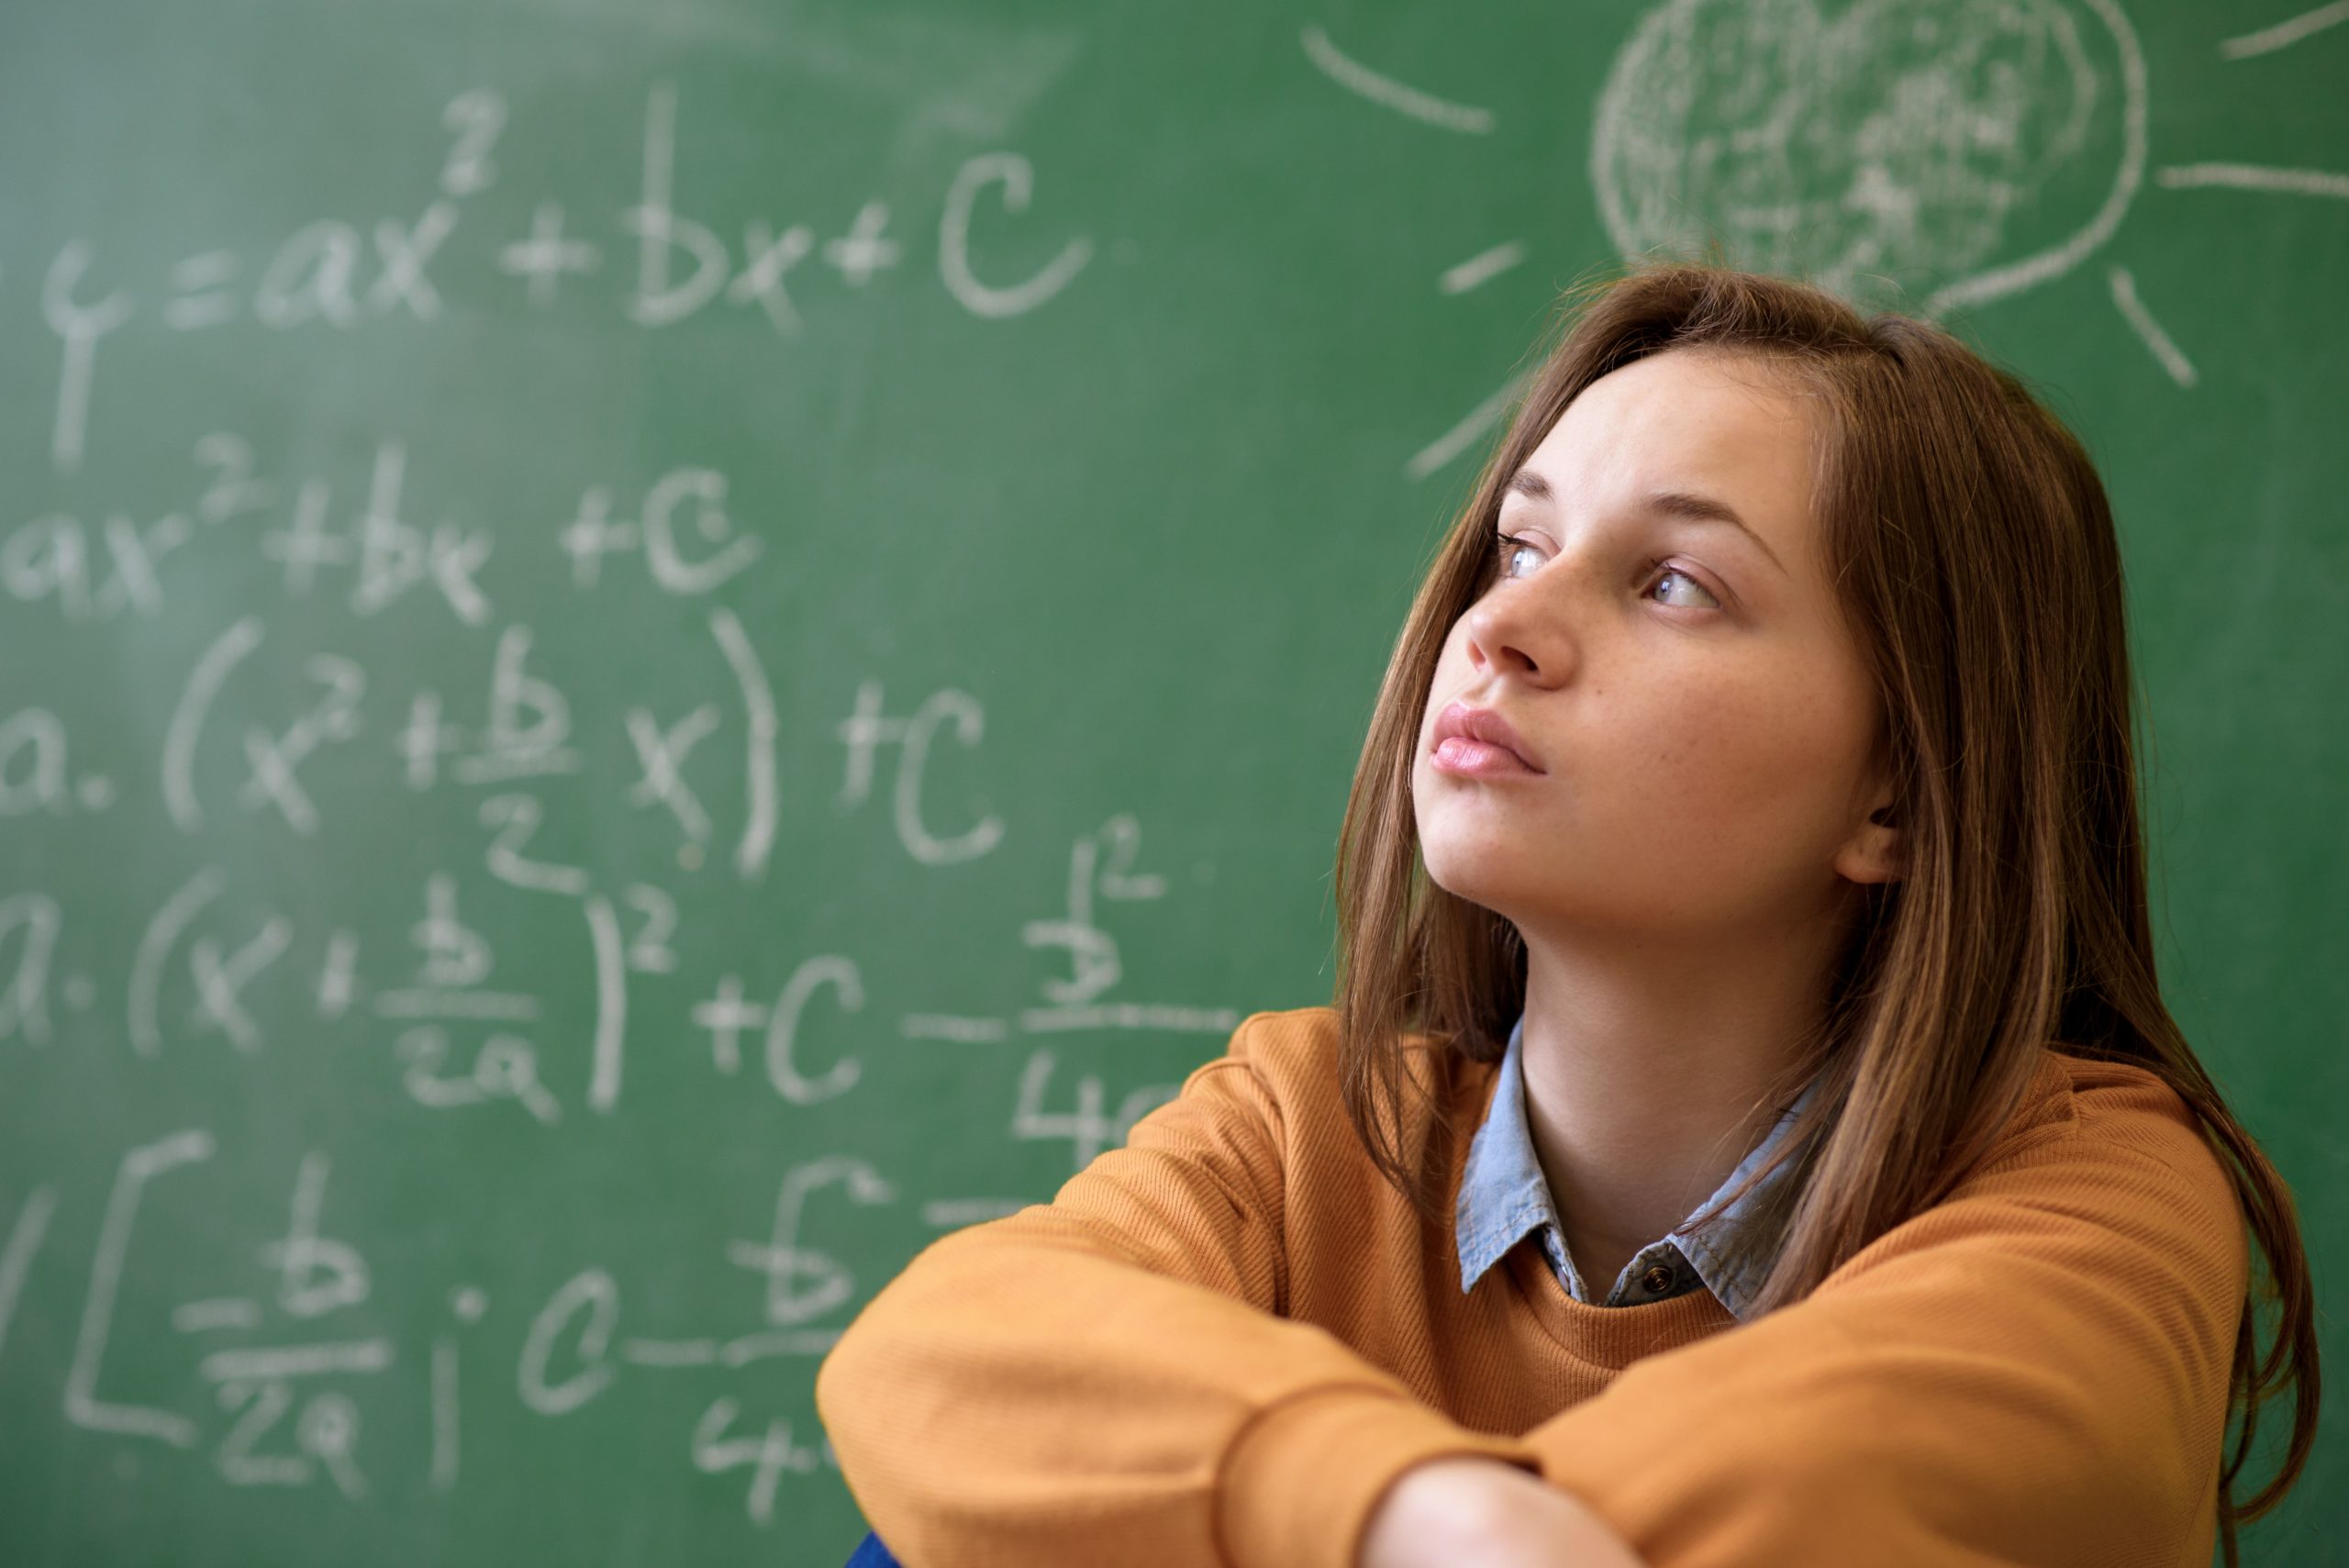 girl student contemplating in front of chalkboard